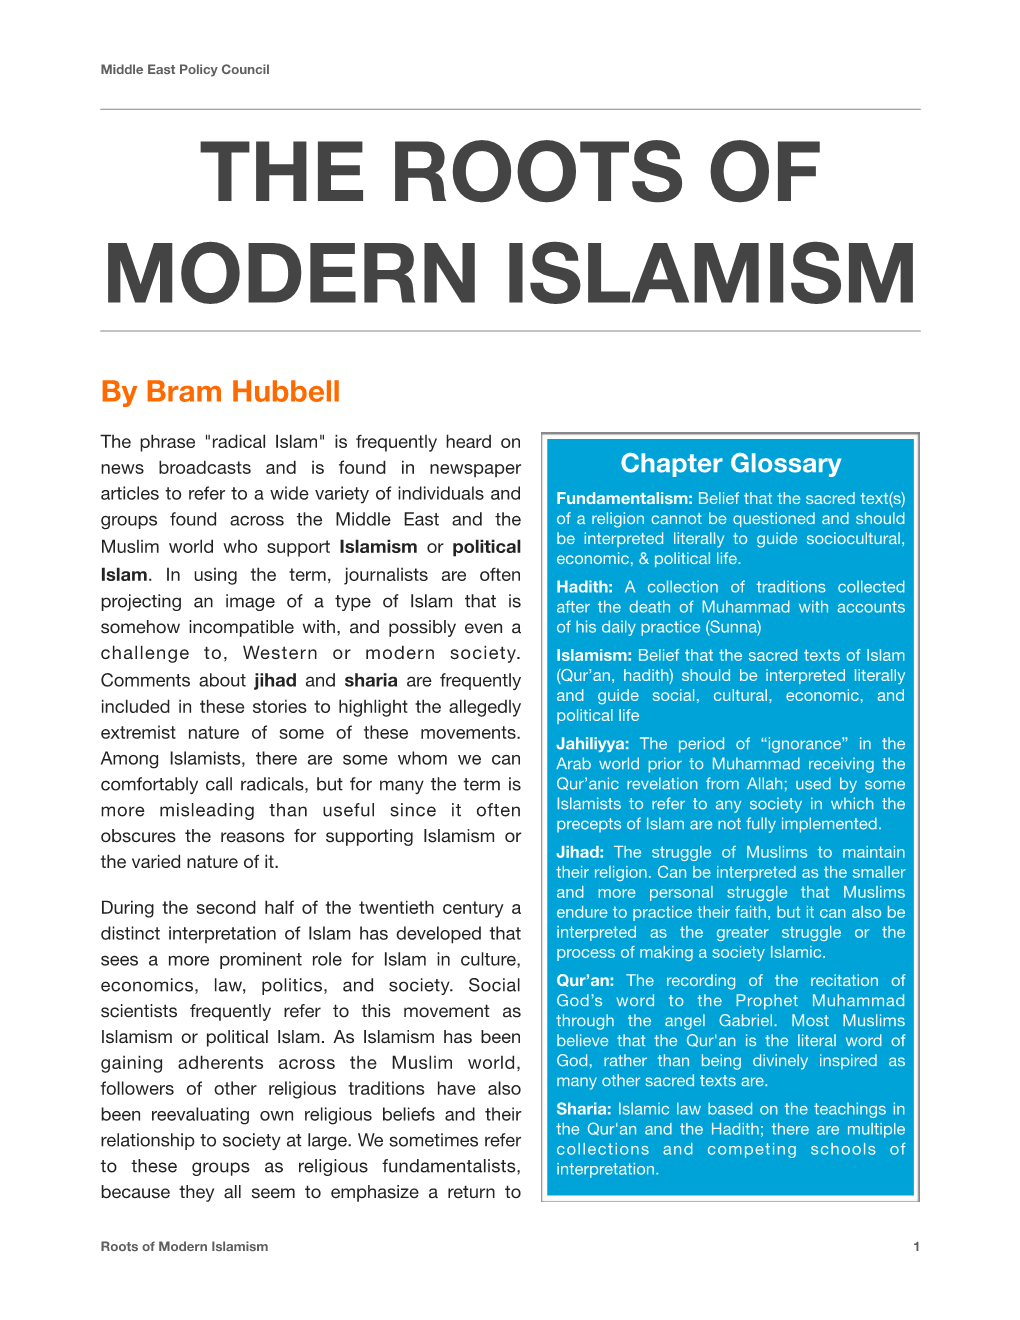 The Roots of Modern Islamism